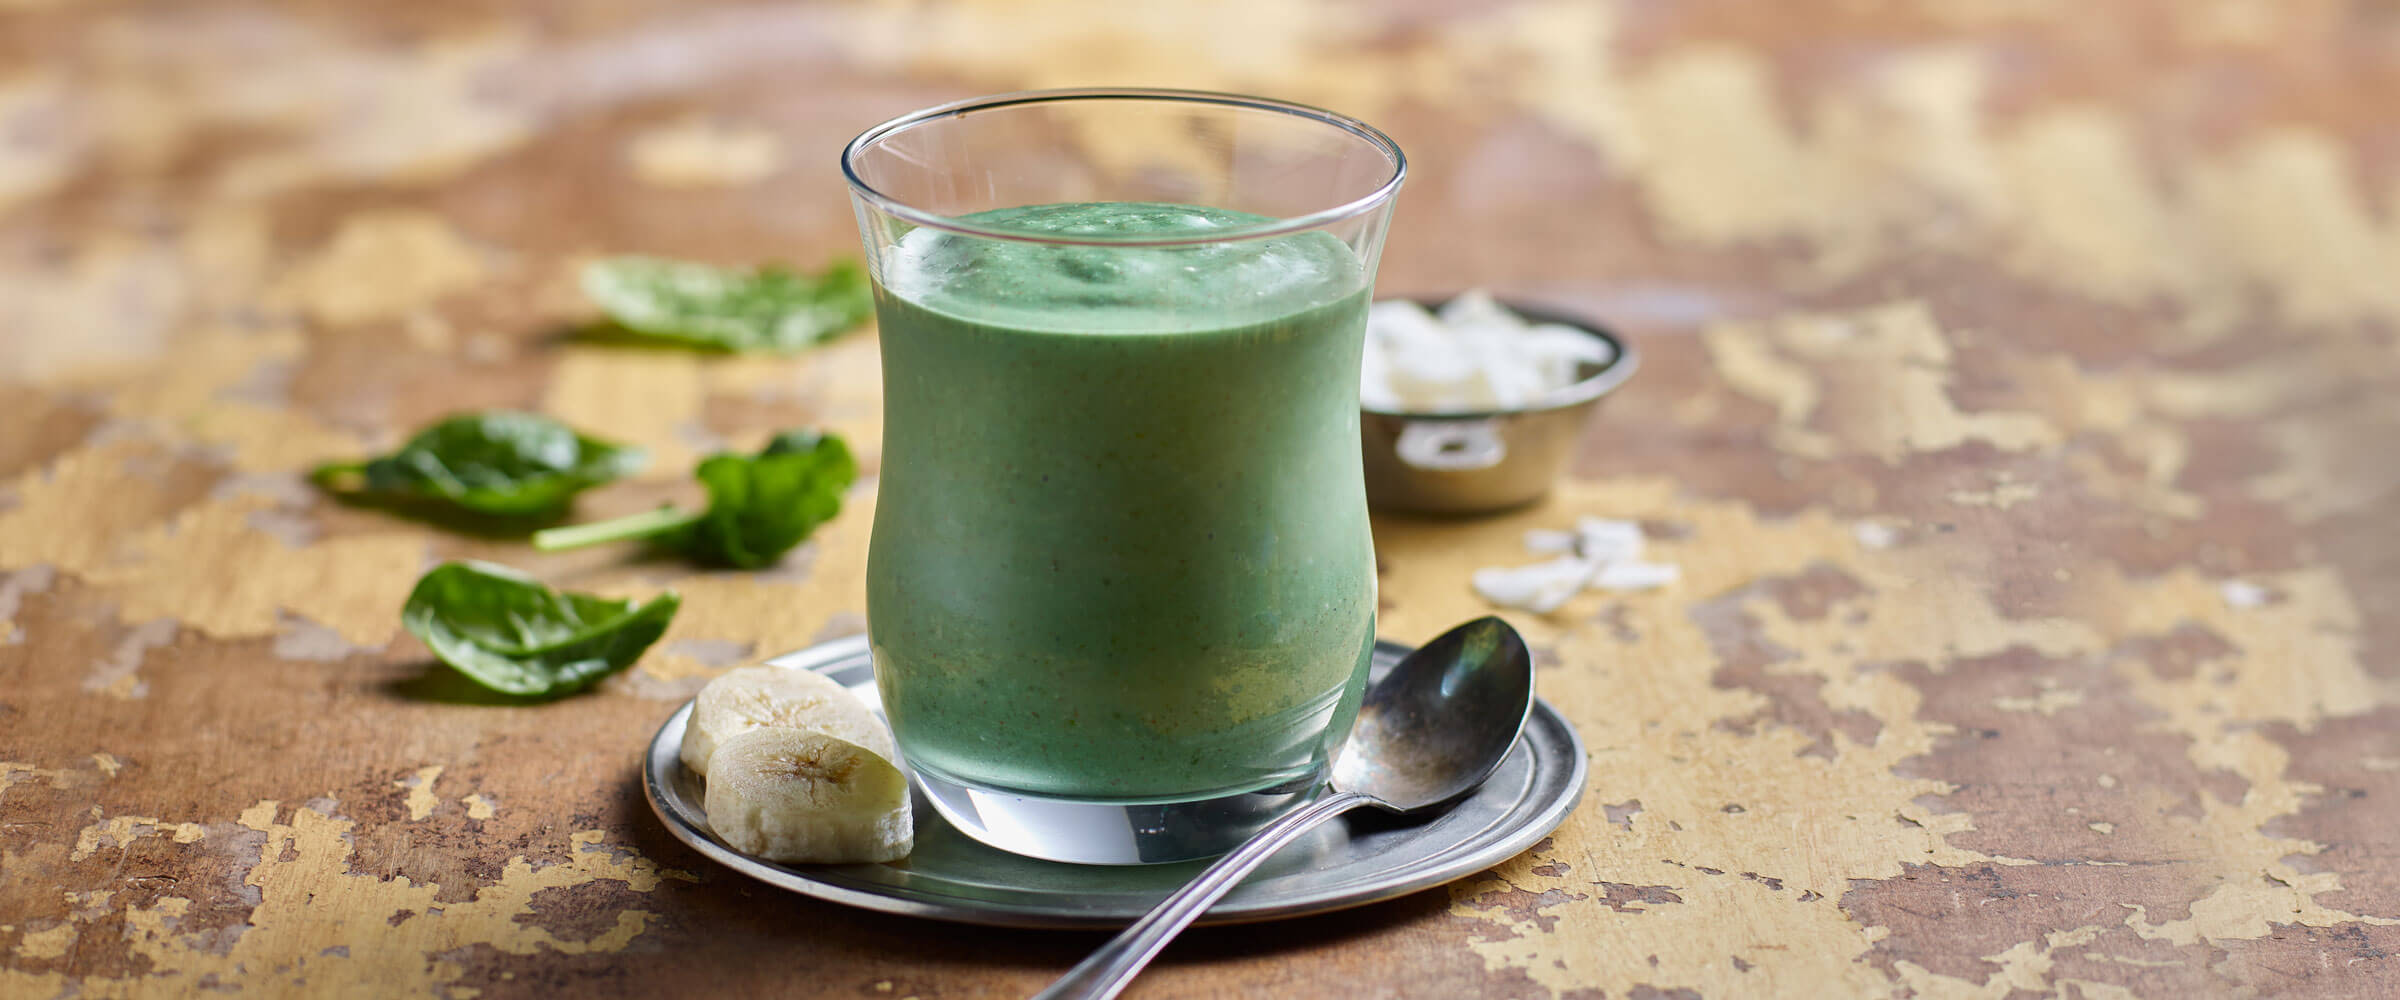 Coconut-Almond Green Smoothie